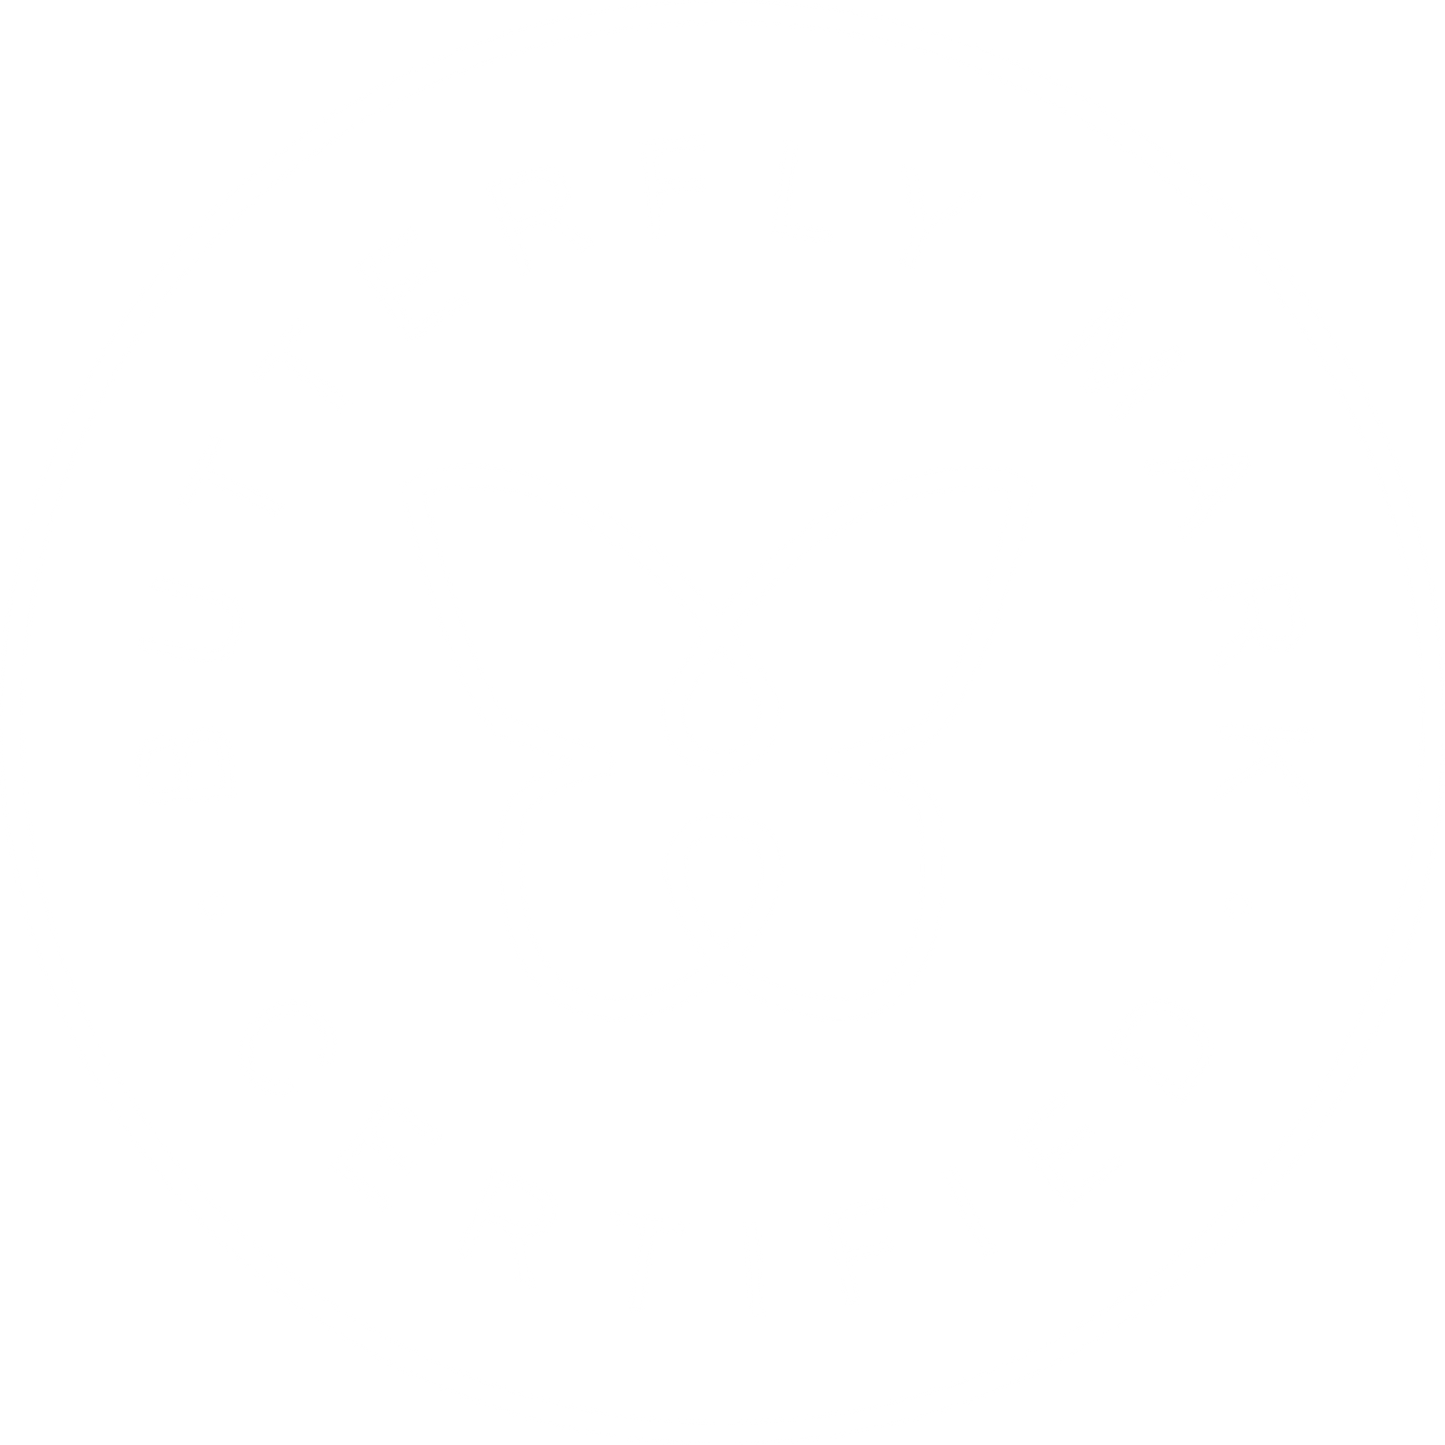 butterfly mark logo for inlight beauty products